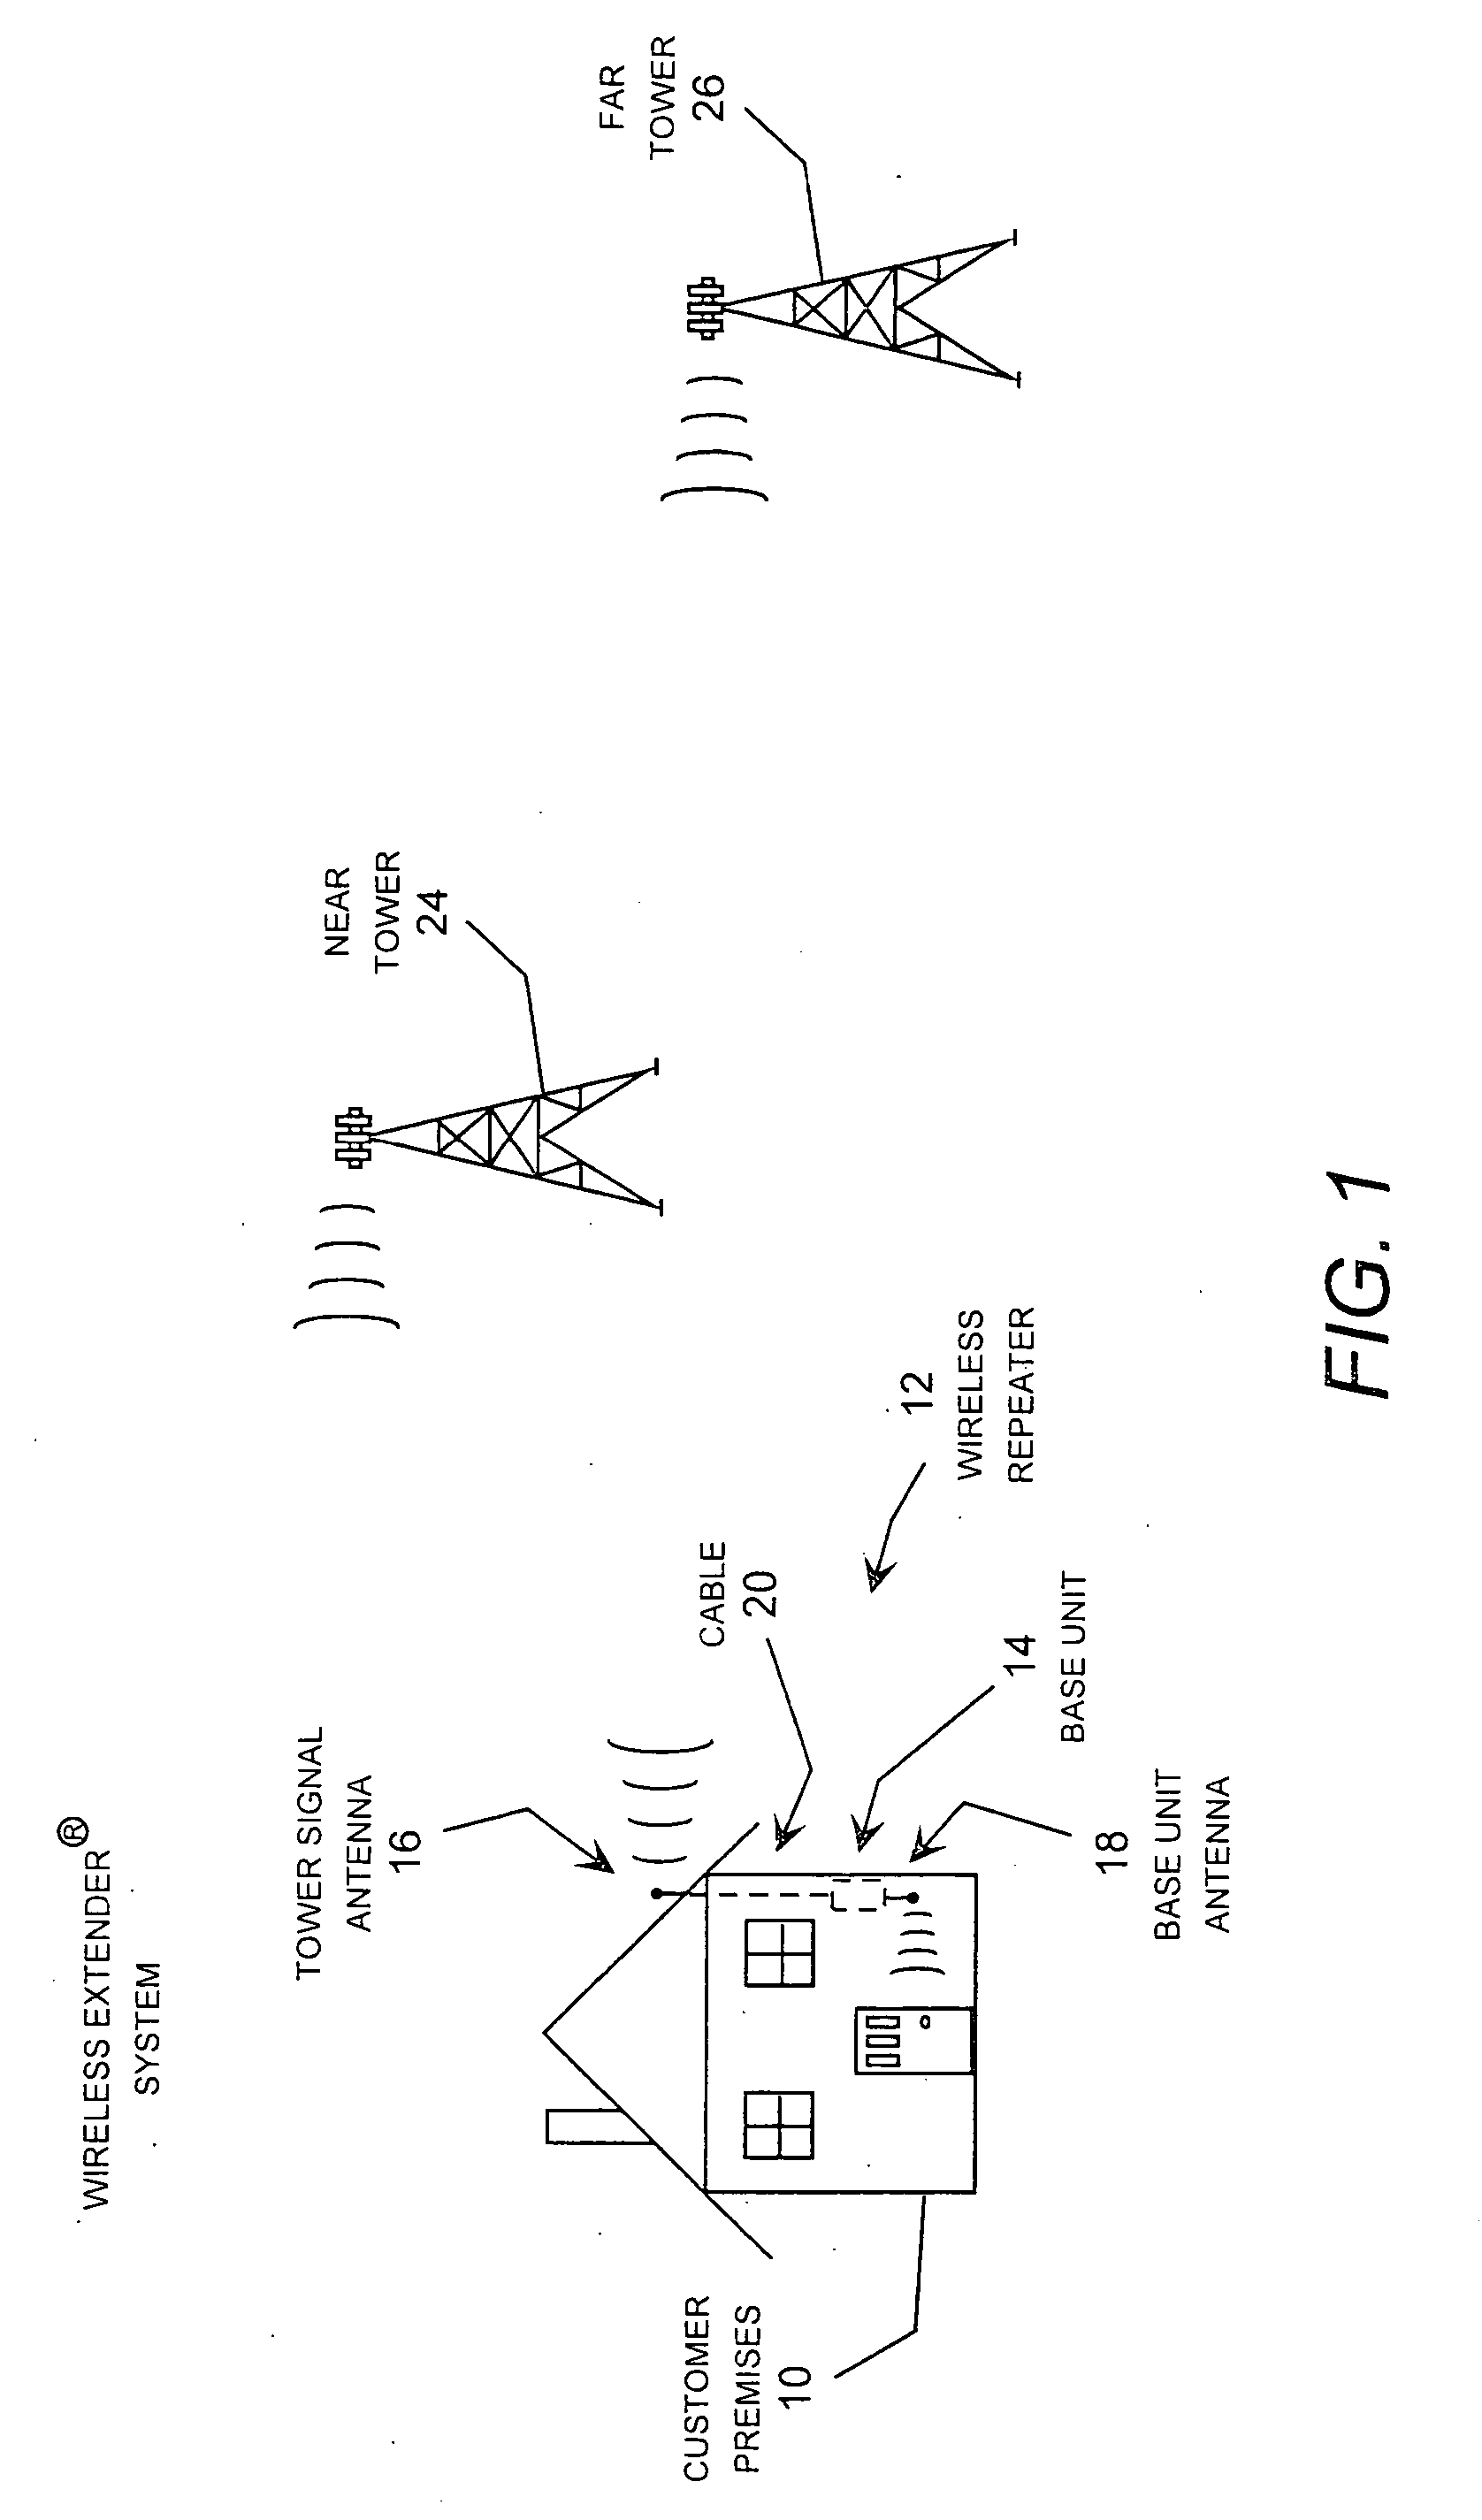 Wireless repeater implementing low-level oscillation detection and protection for a duplex communication system